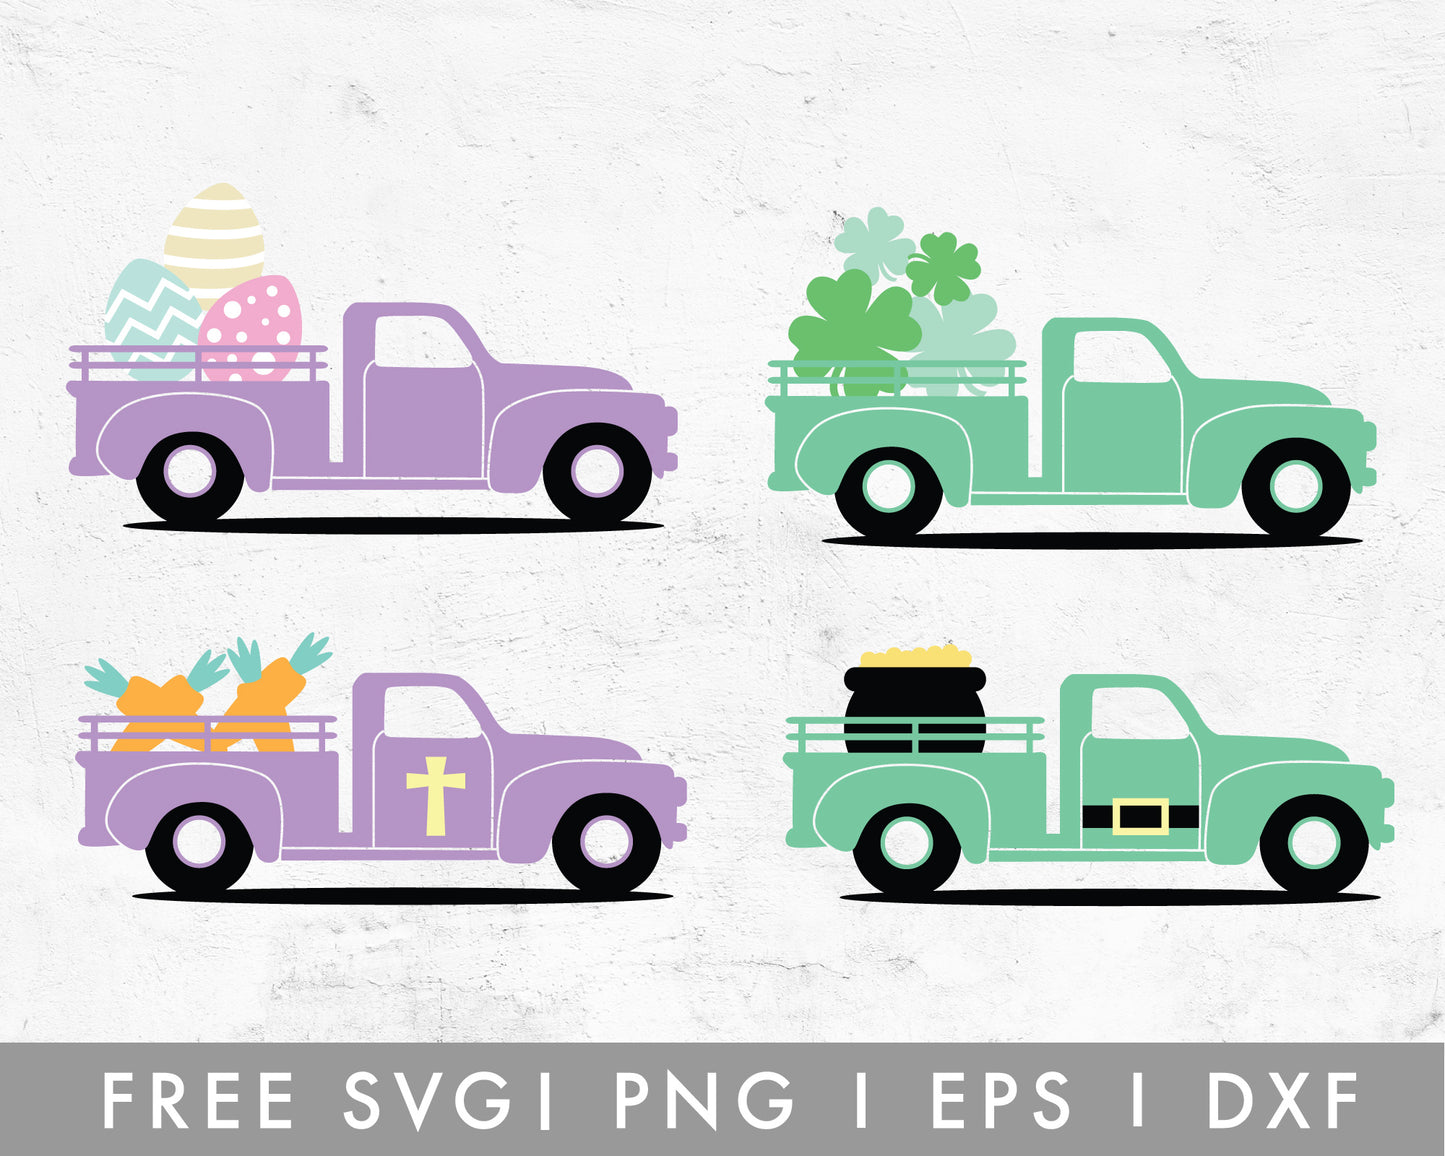 FREE Easter St. Patricks Truck SVG Cut File for Cricut, Cameo Silhouette | Free SVG Cut File